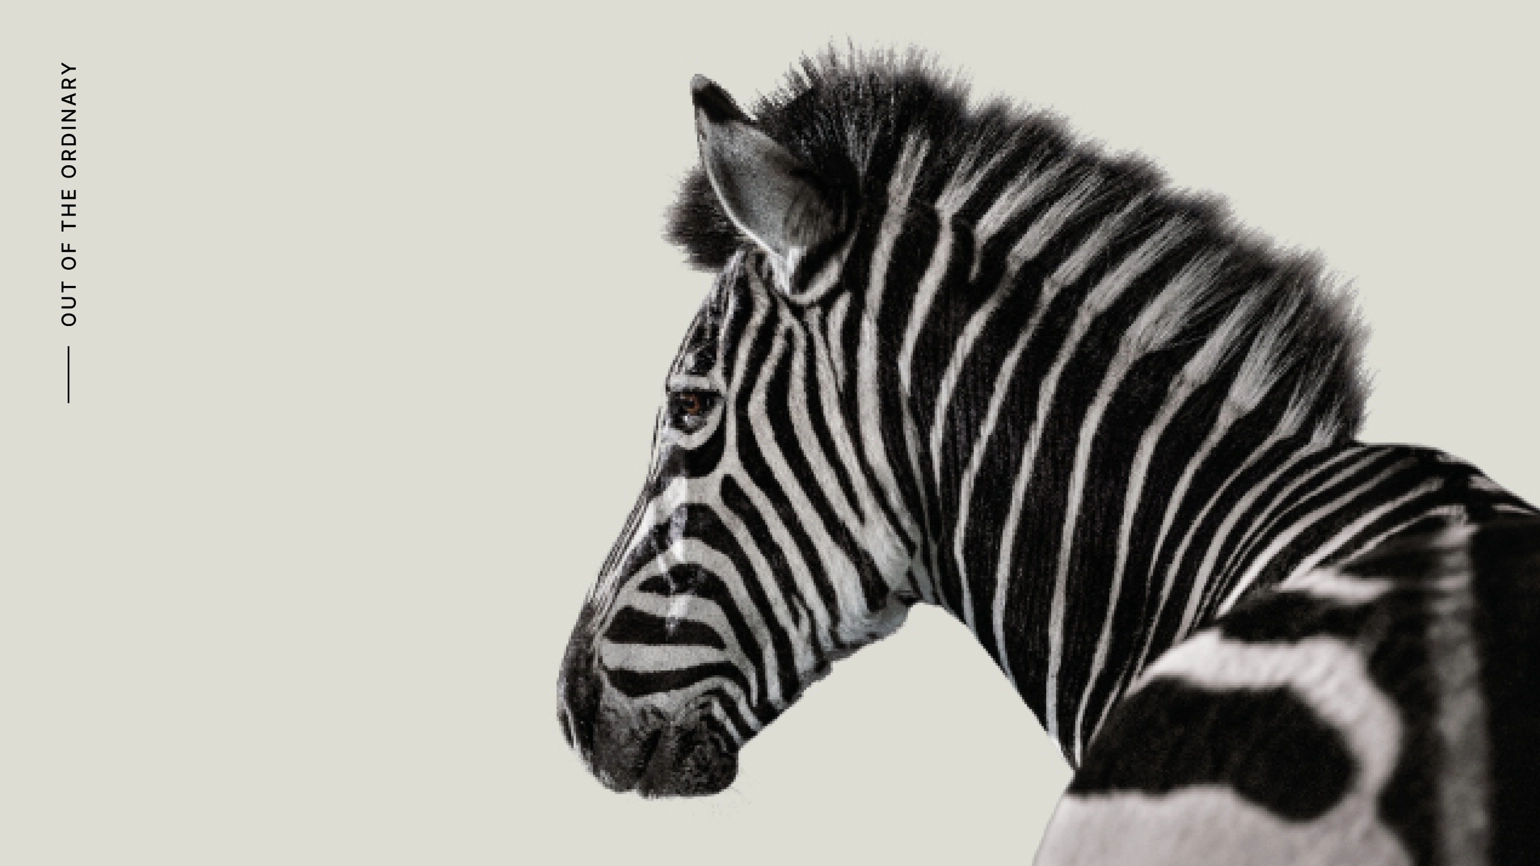 A shot from the back of a zebra